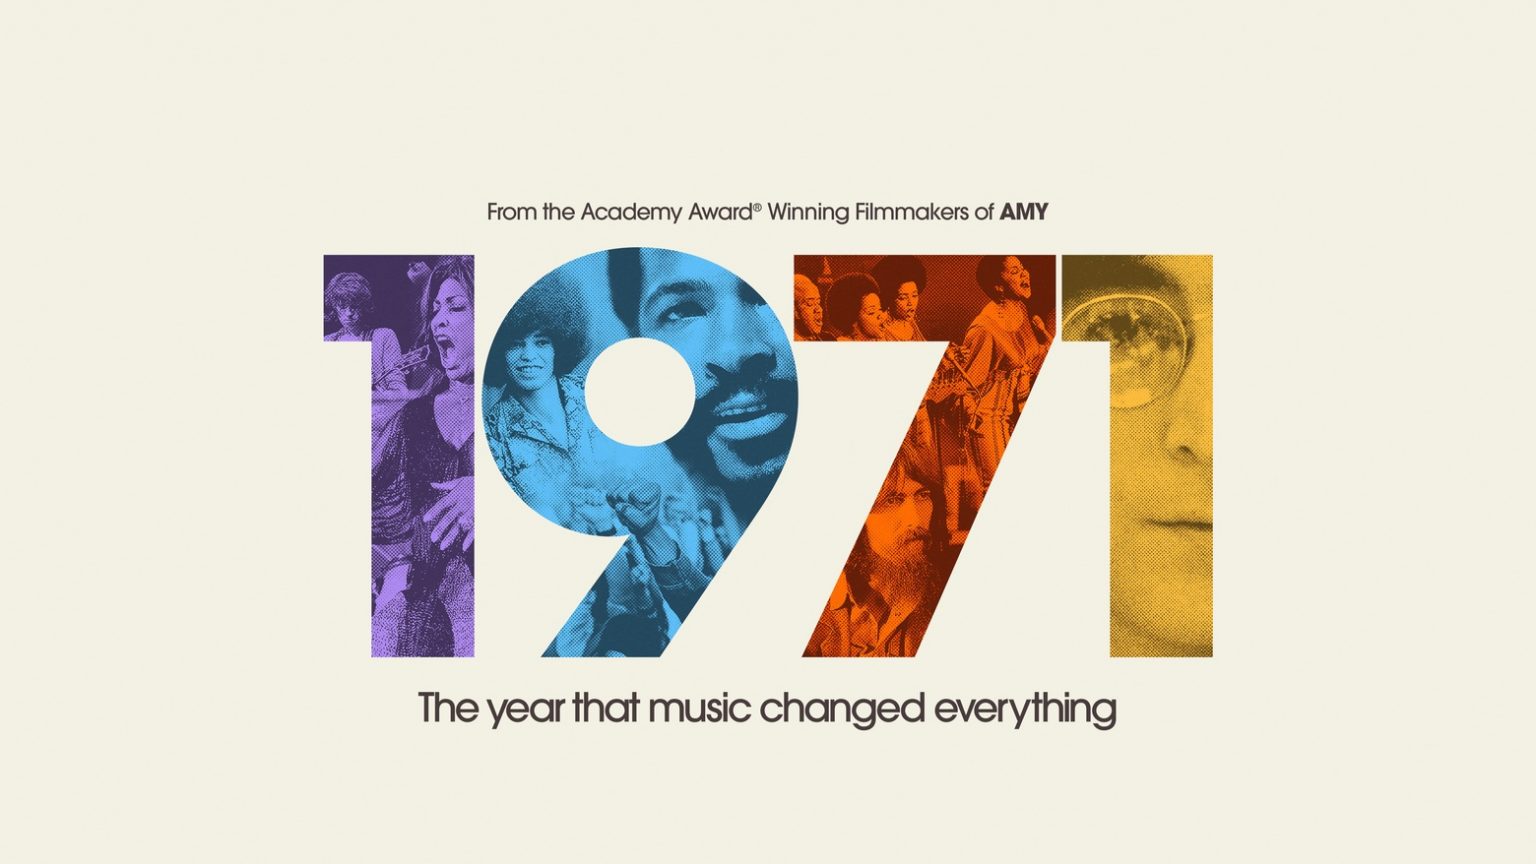 “1971: The Year That Music Changed Everything” debuted on Apple TV+ in May.